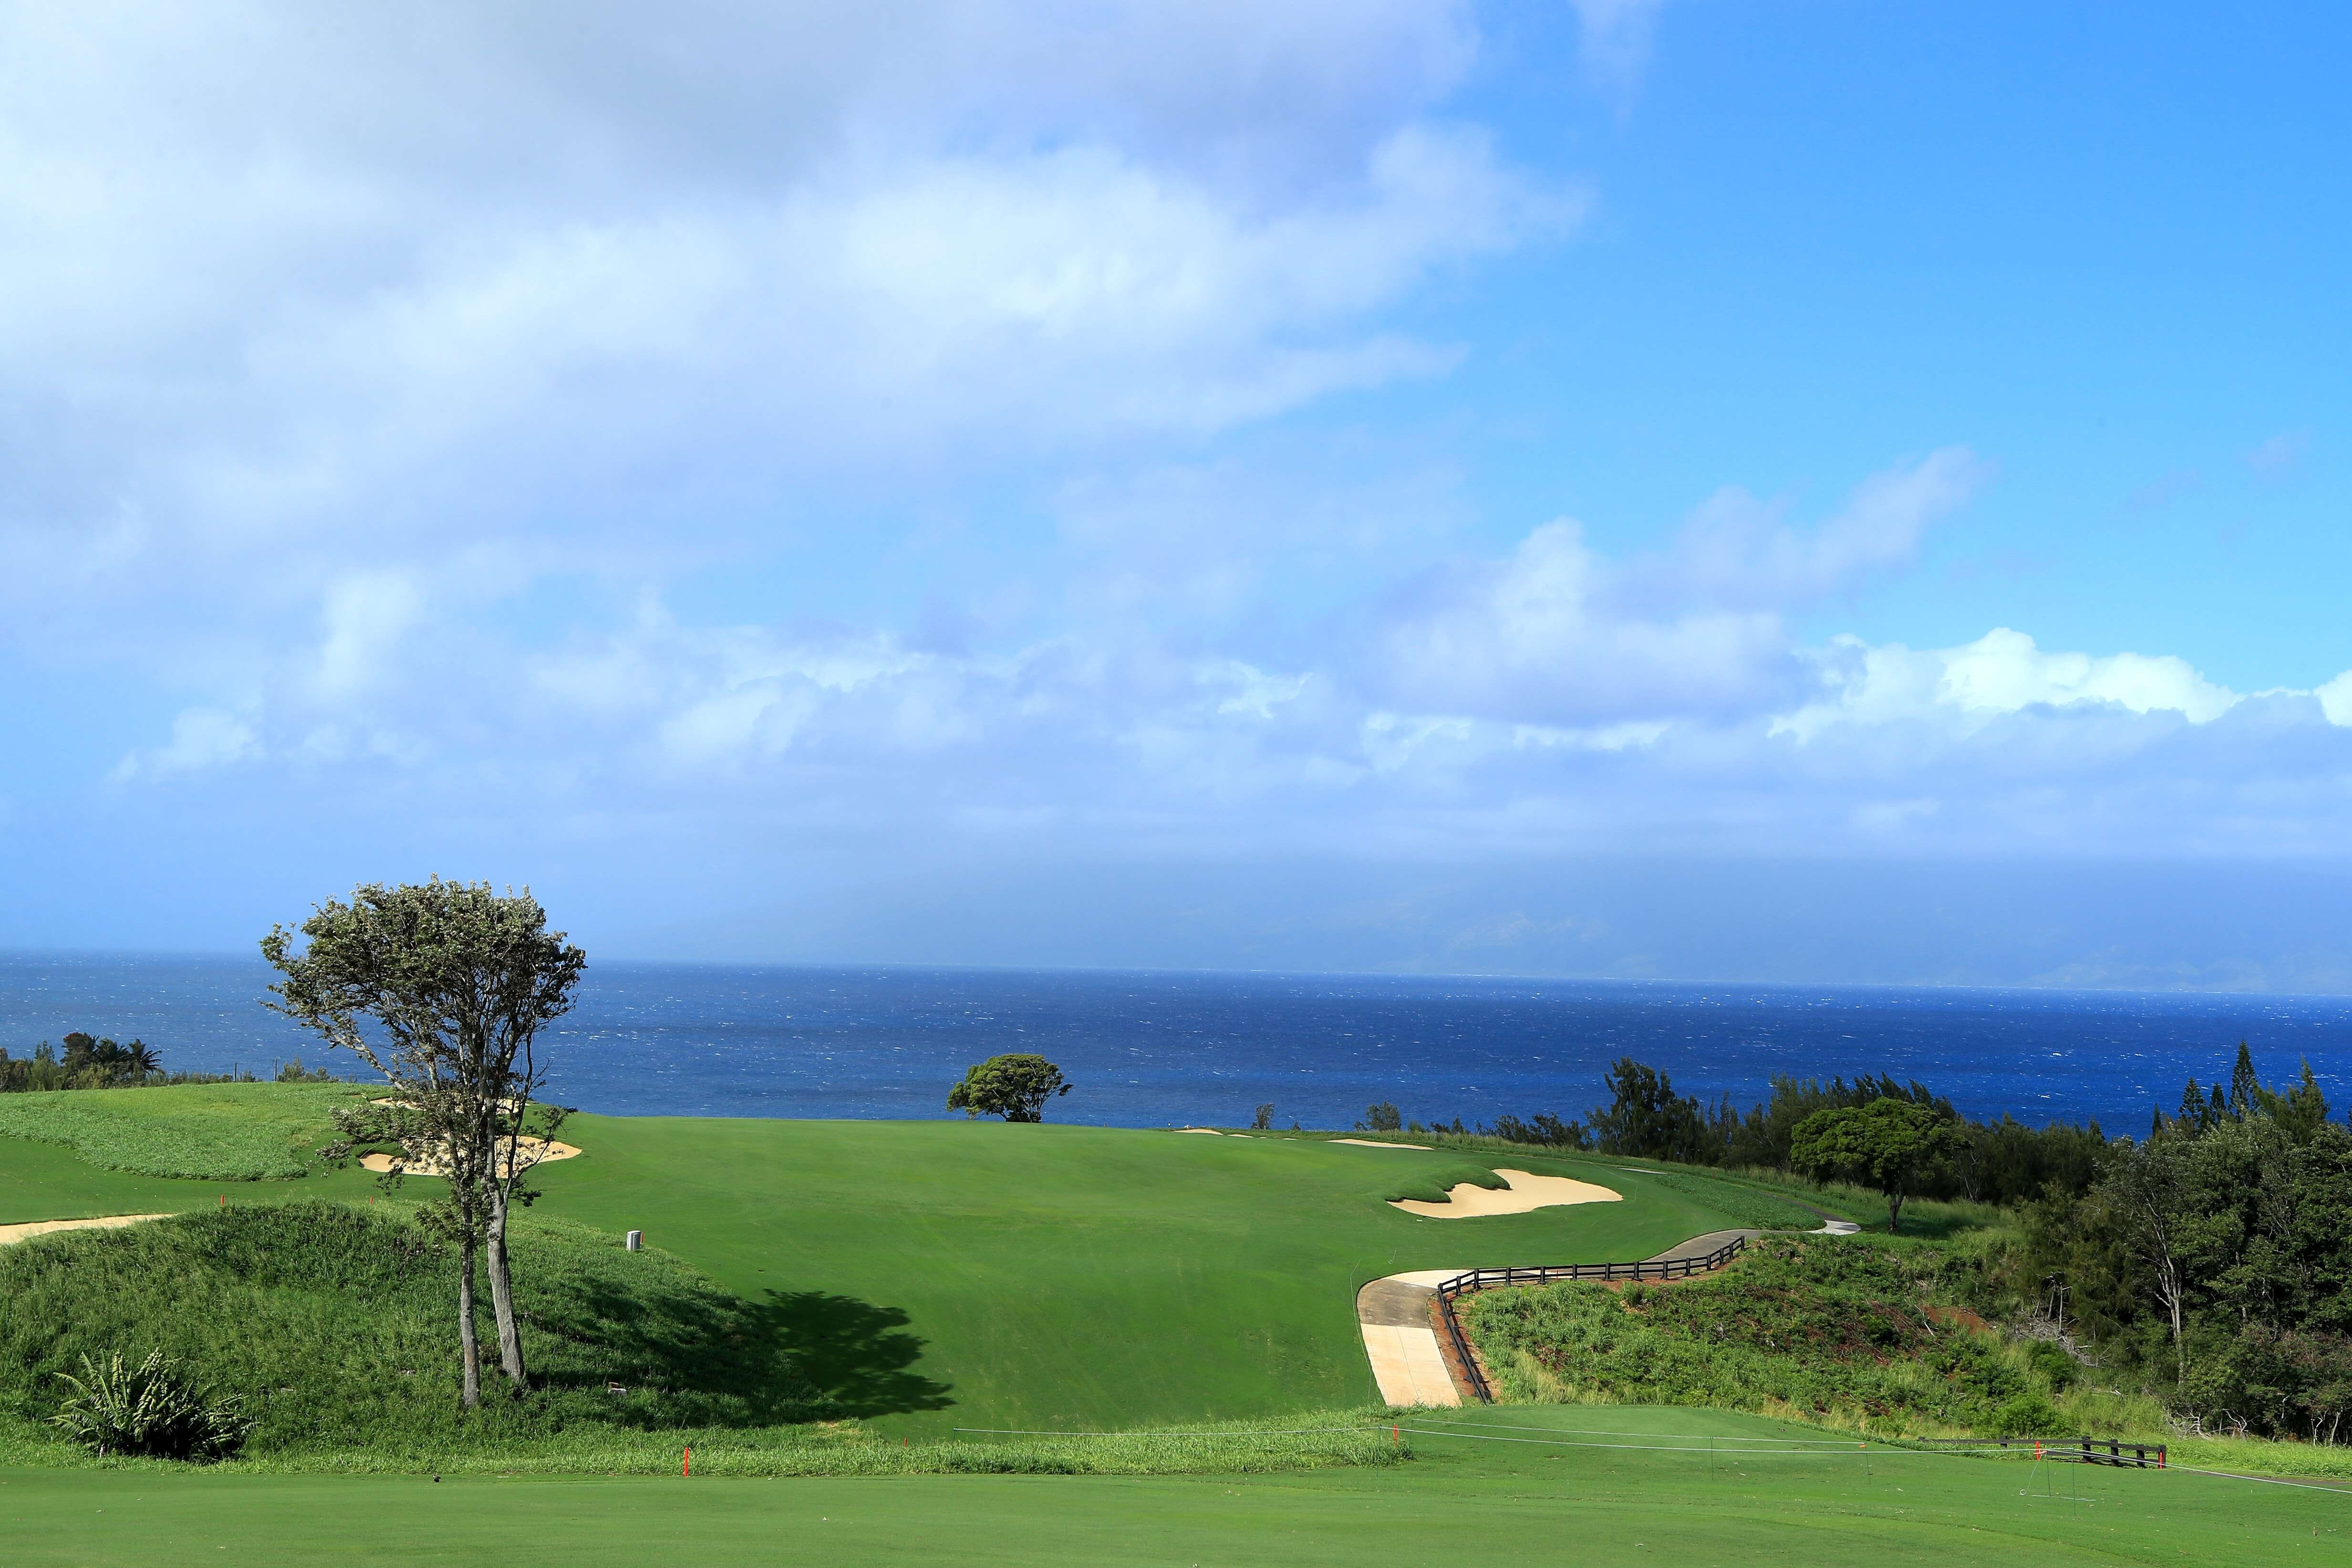 The 12th hole at the Plantation Course at Kapalua Golf Club in Kapalua, Hawaii. Under a three-year plan, Honma is investing heavily in the US to grow its market share to as much as 10 per cent from less than 1 per cent now. Photo: AFP